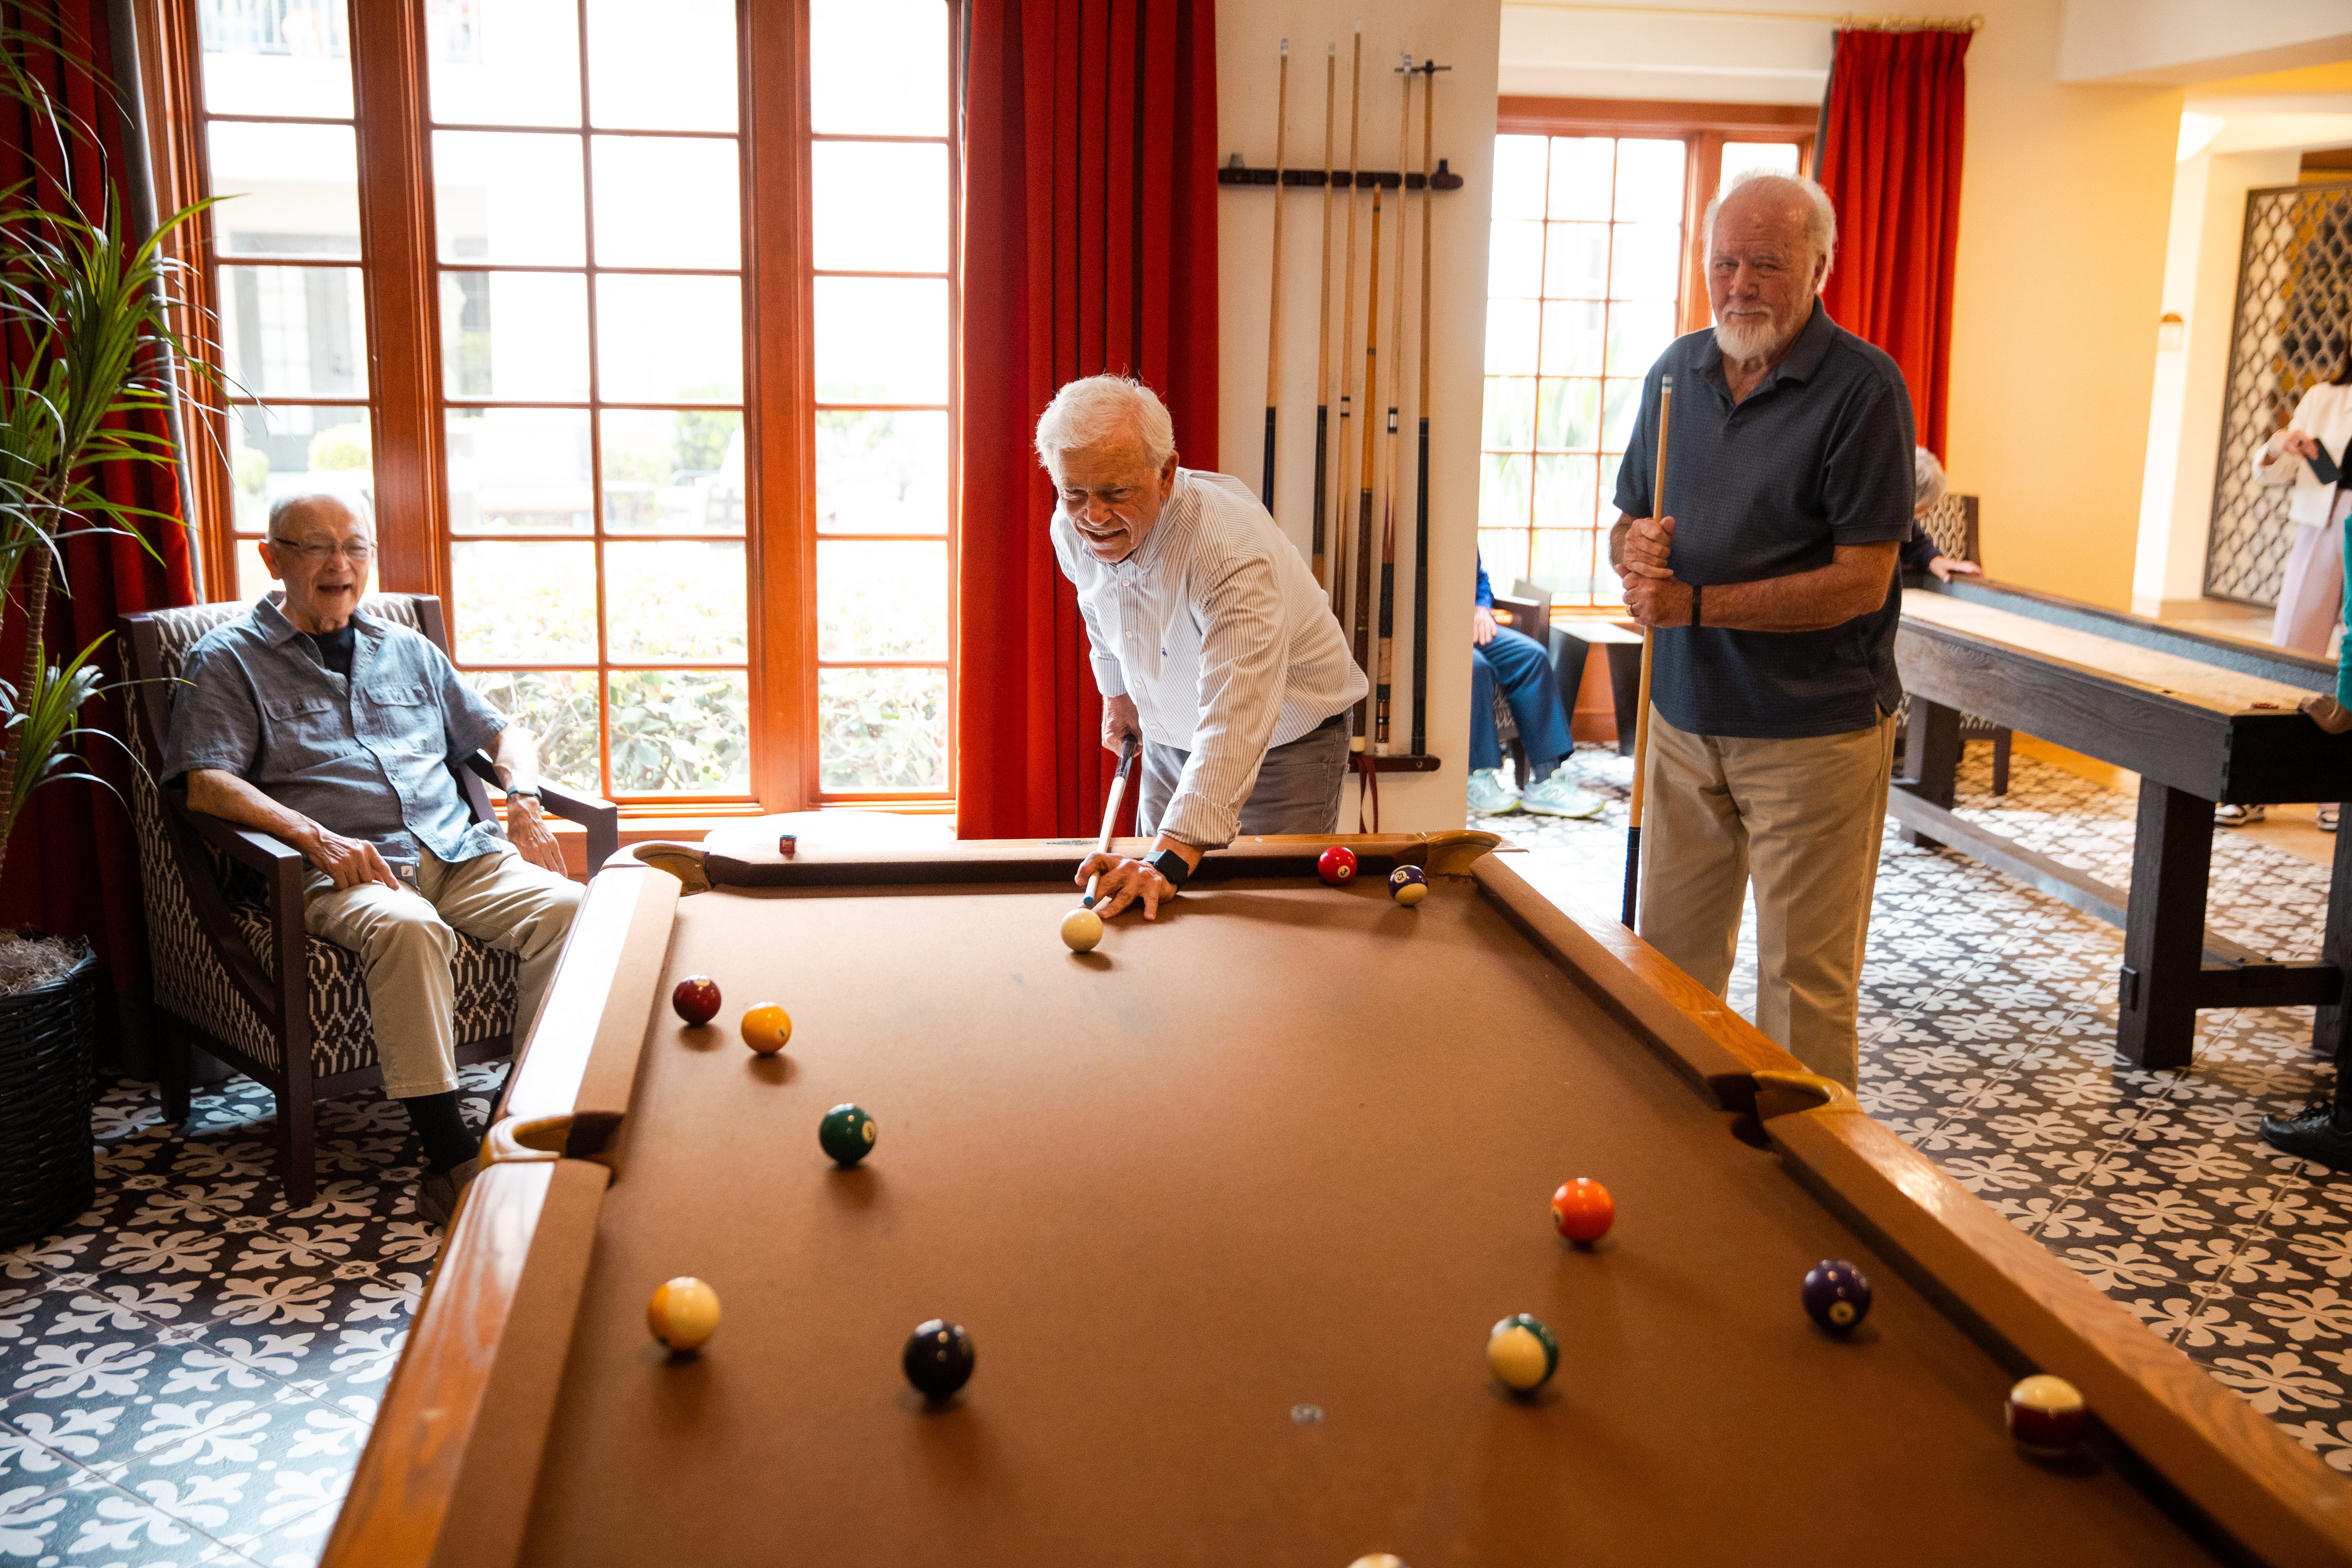 three elderly men playing pool together in game room